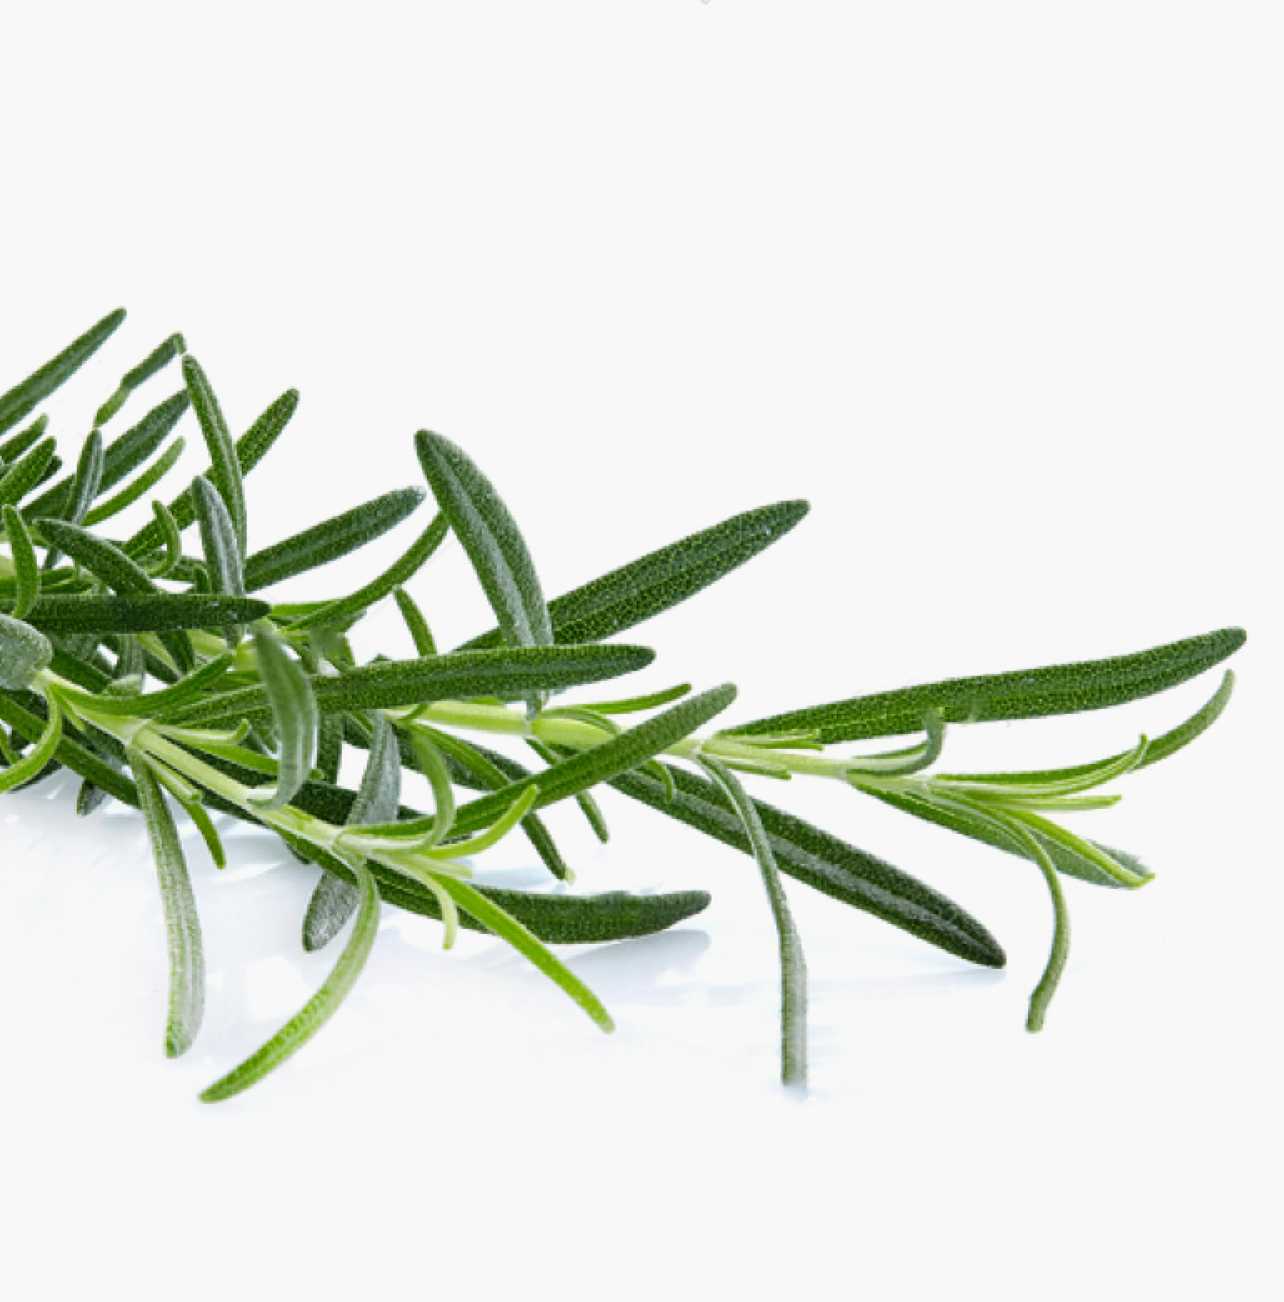 Sprig of bright green rosemary on a white background.